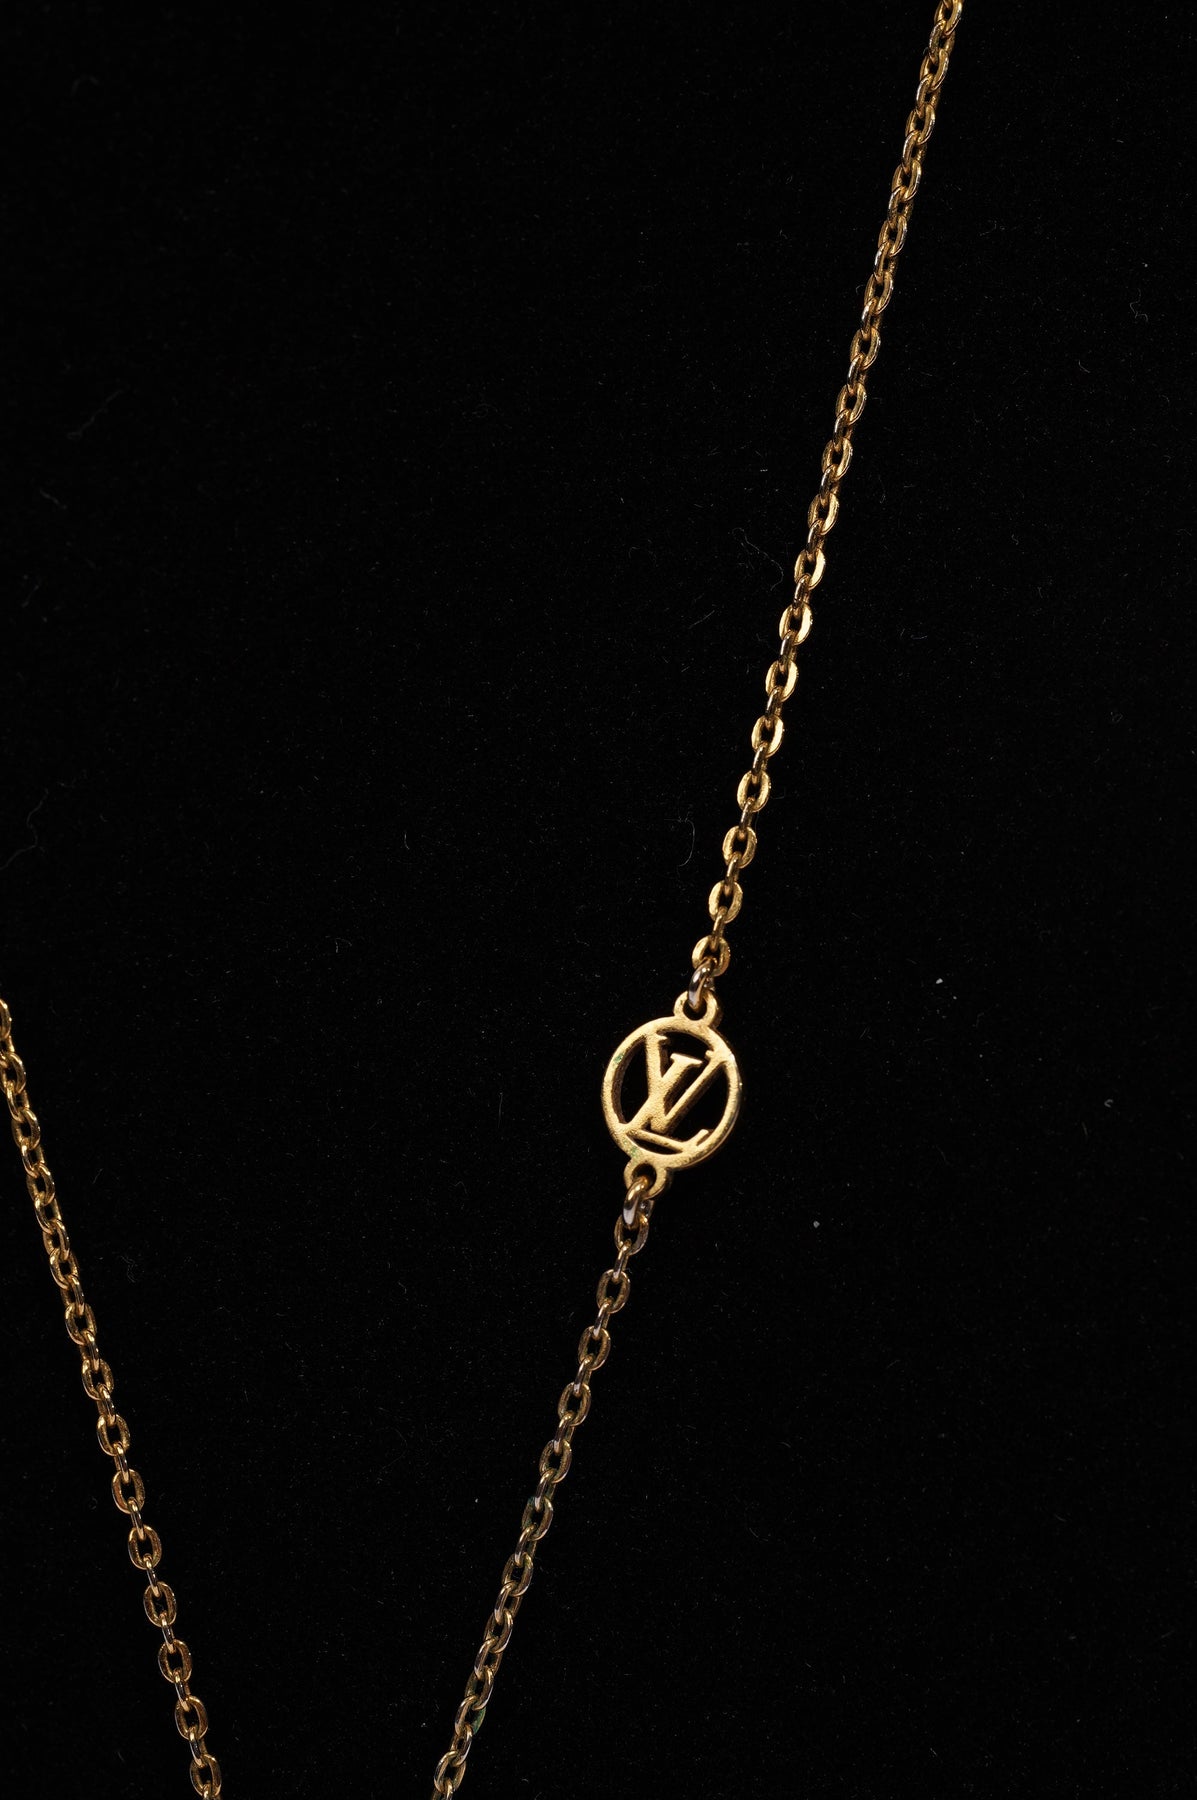 Nanogram necklace Louis Vuitton Gold in Gold plated - 31088339